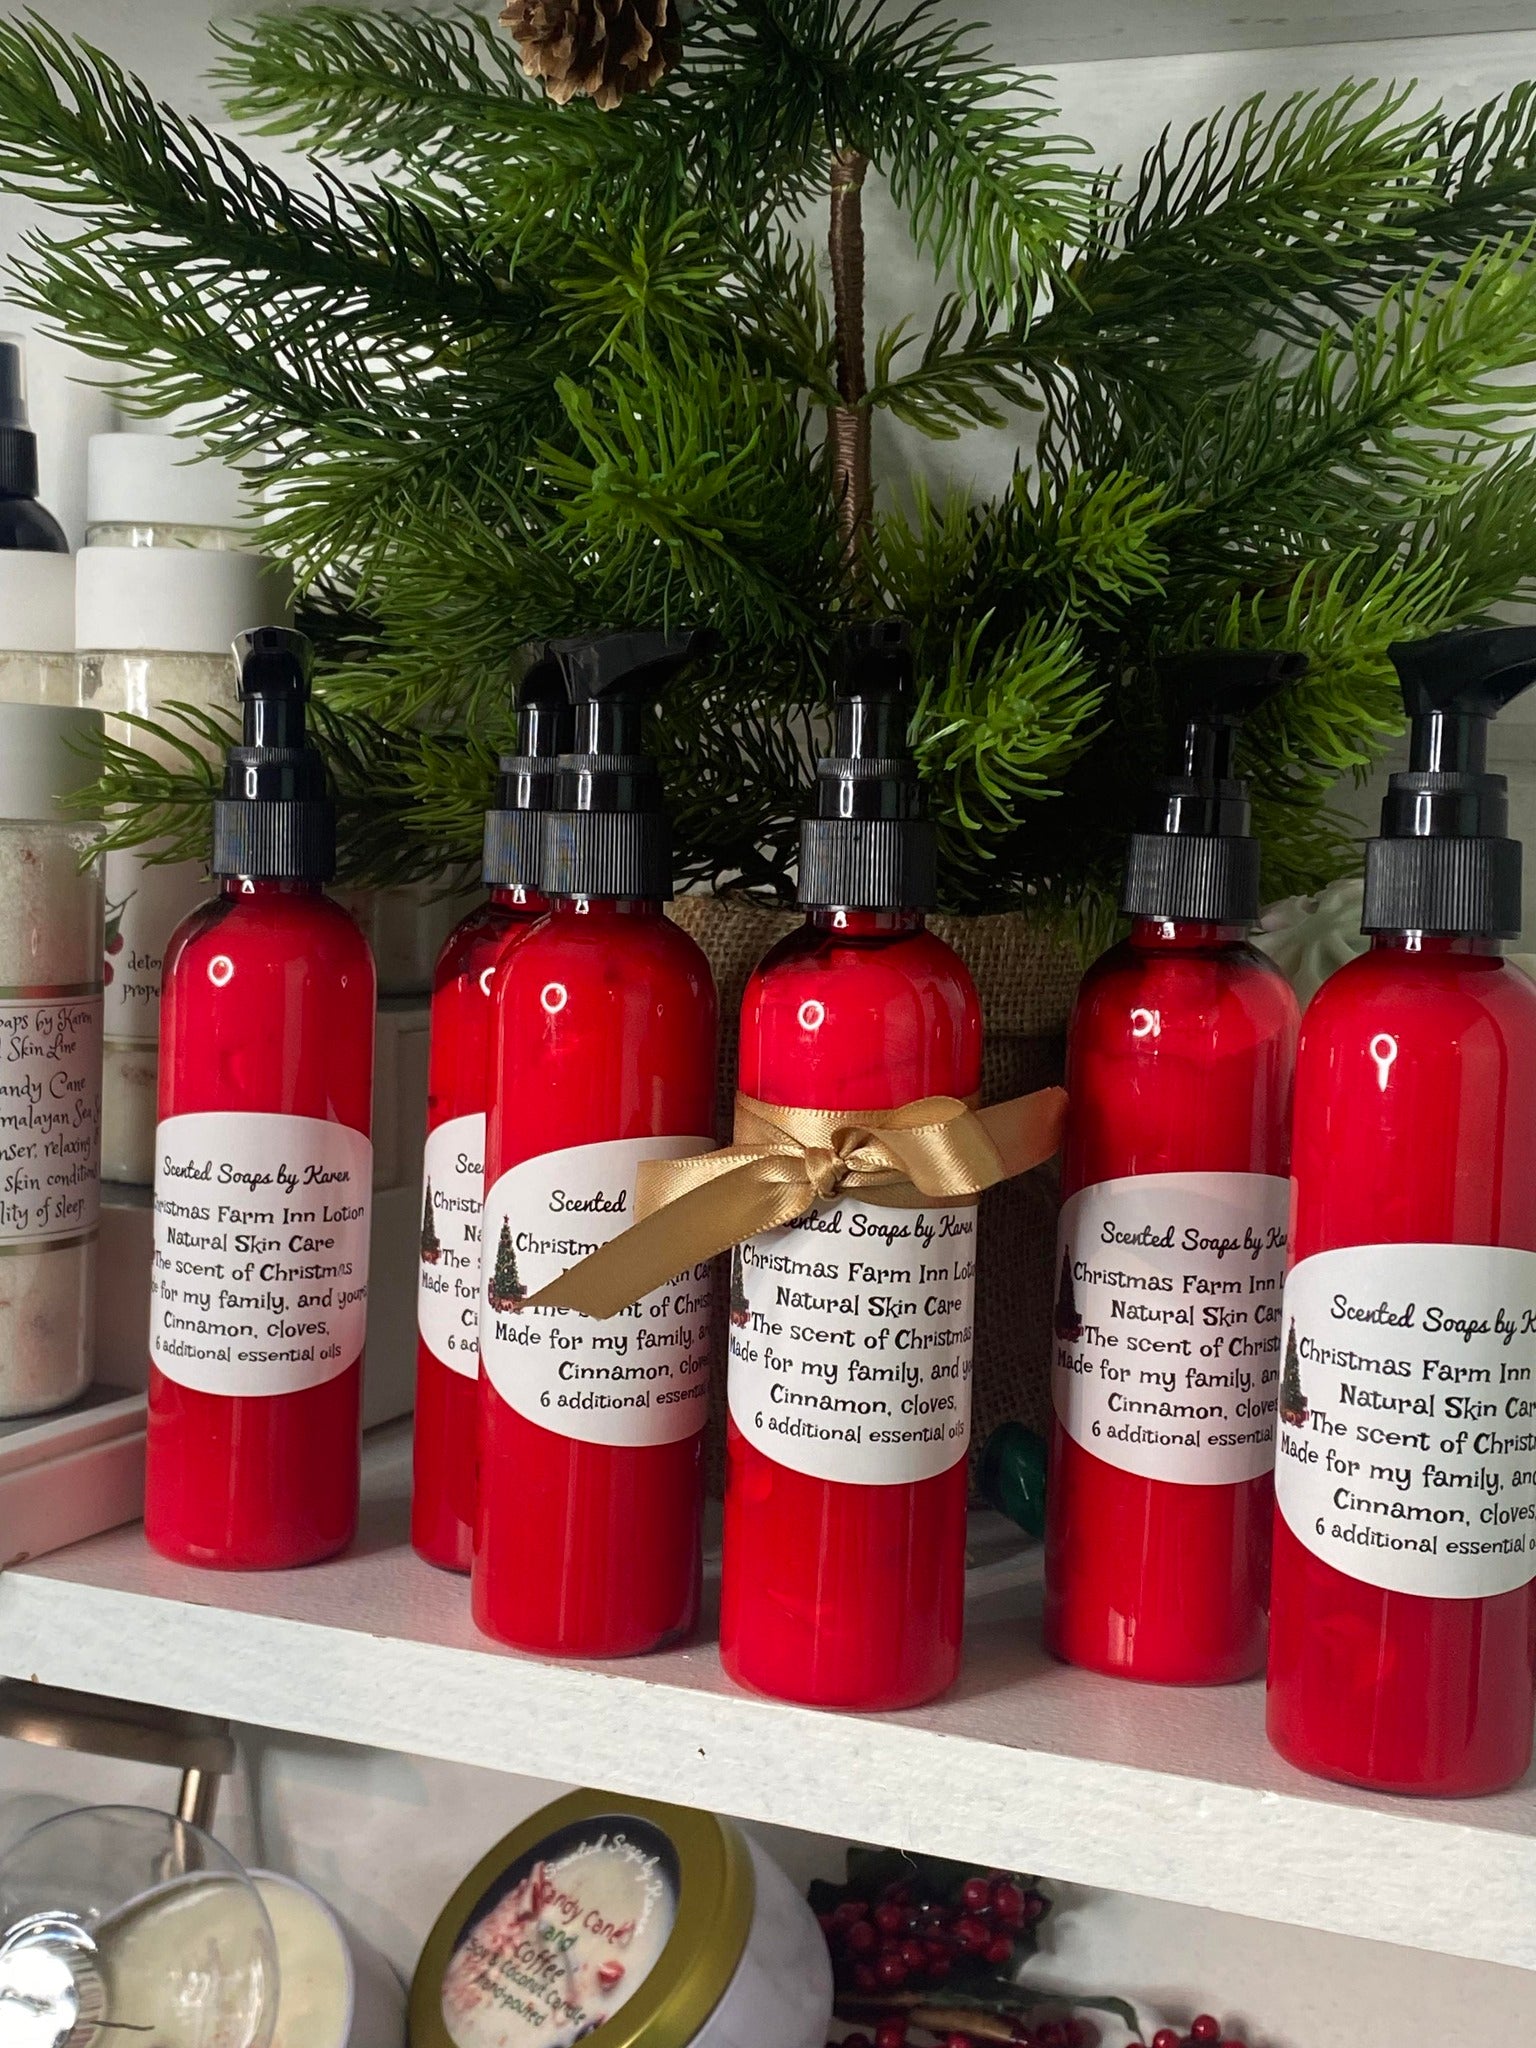 Christmas Farm Inn and Spa LOTION.  NEW PUMP BOTTLES. Cinnamon and Cloves with an additional 6 essential oils.